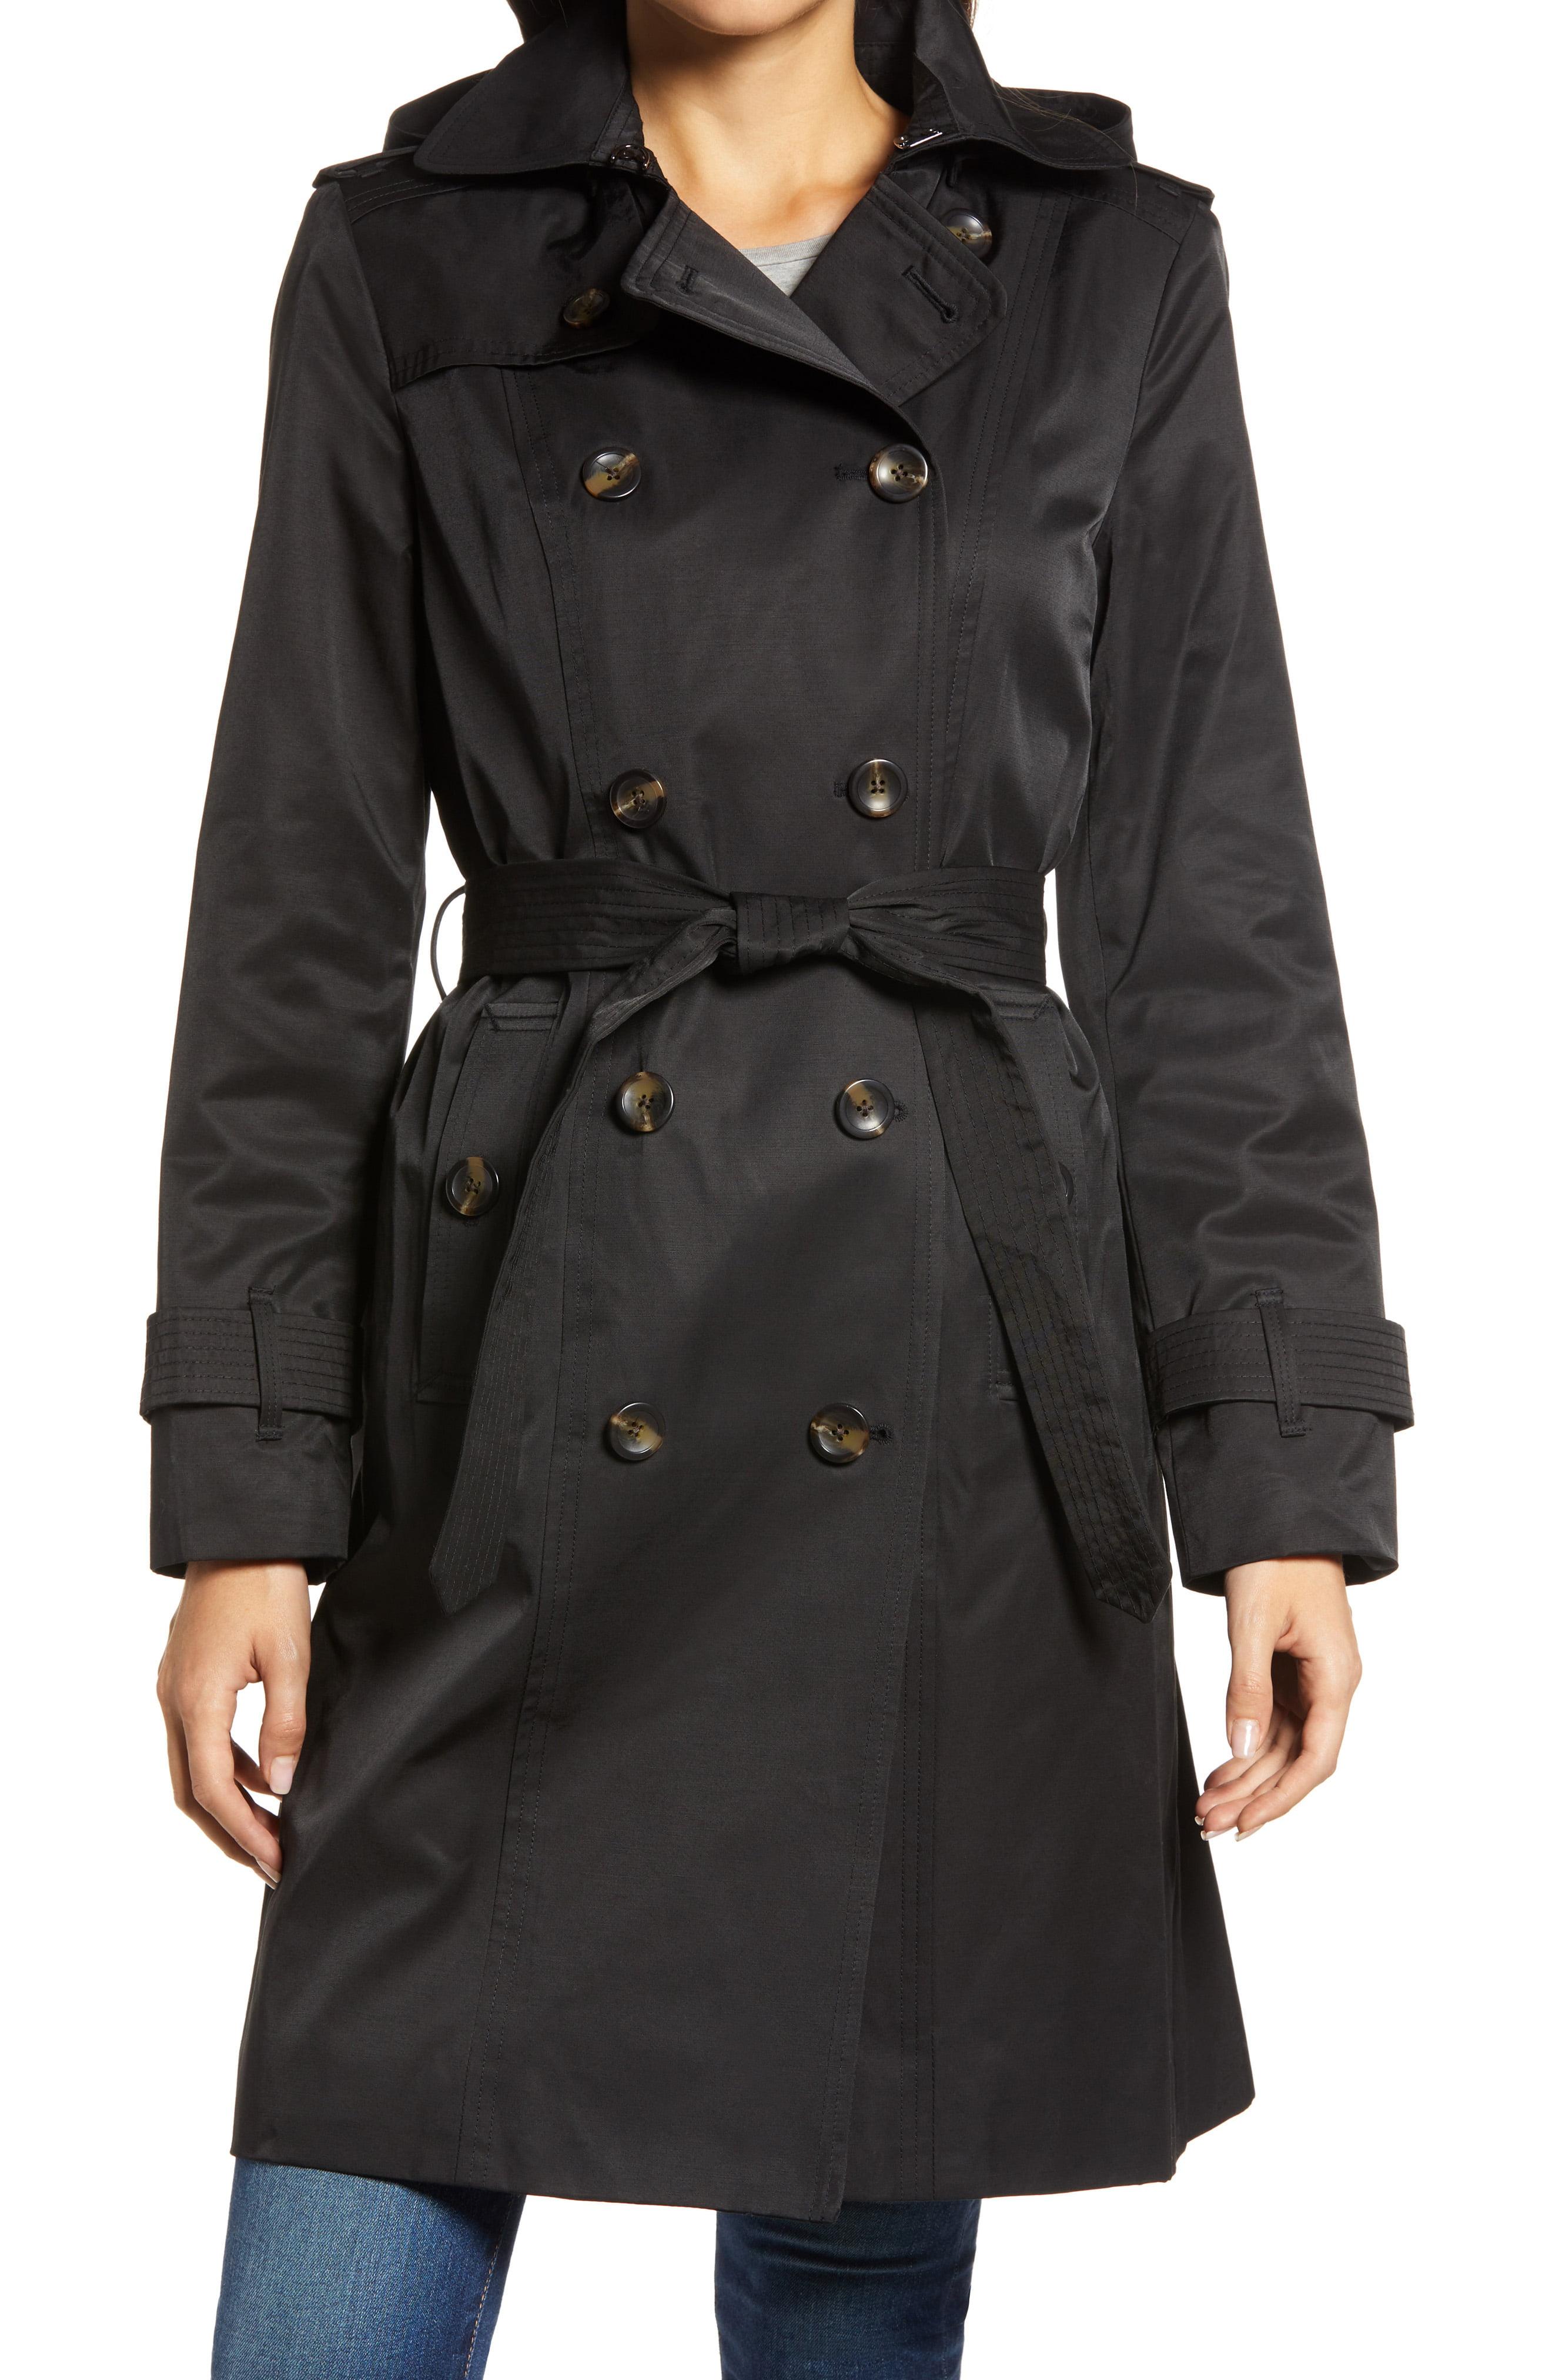 London Fog Double Breasted Trench Coat With Removable Hood in Black - Save 26% - Lyst